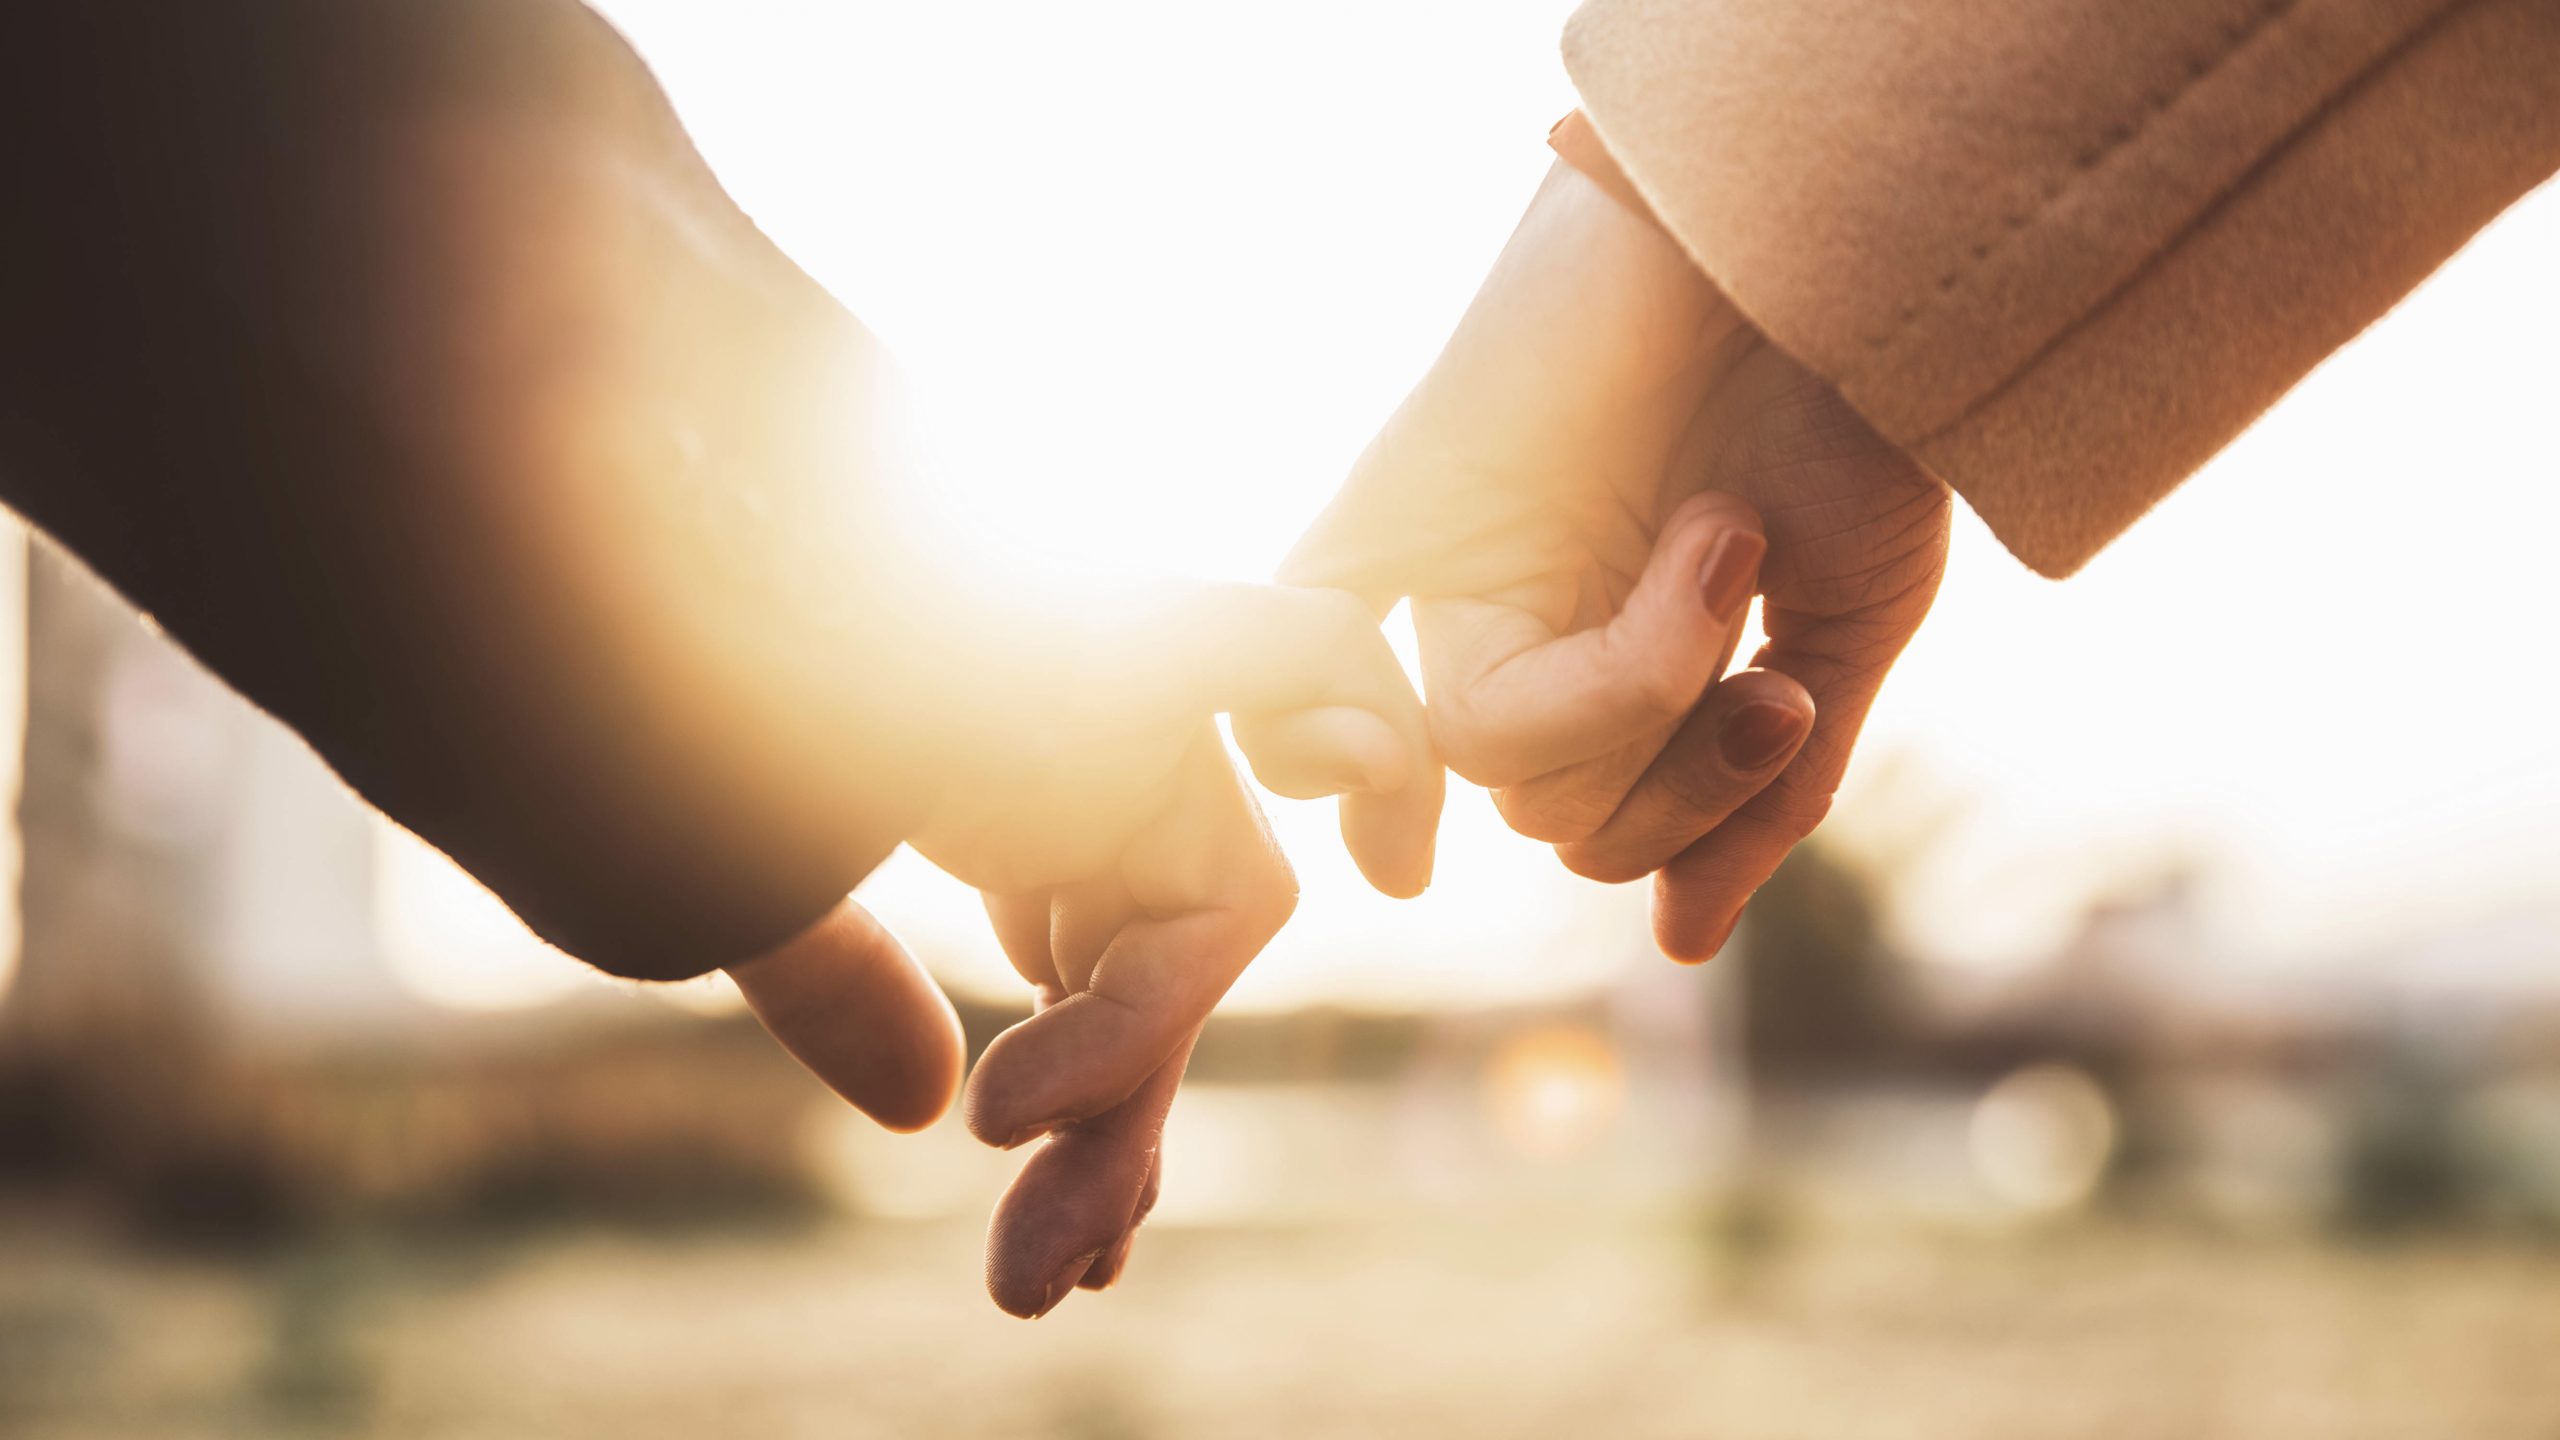 Closeup image of two lovers holding hands at sunset - Trust, love, relationship and support concept